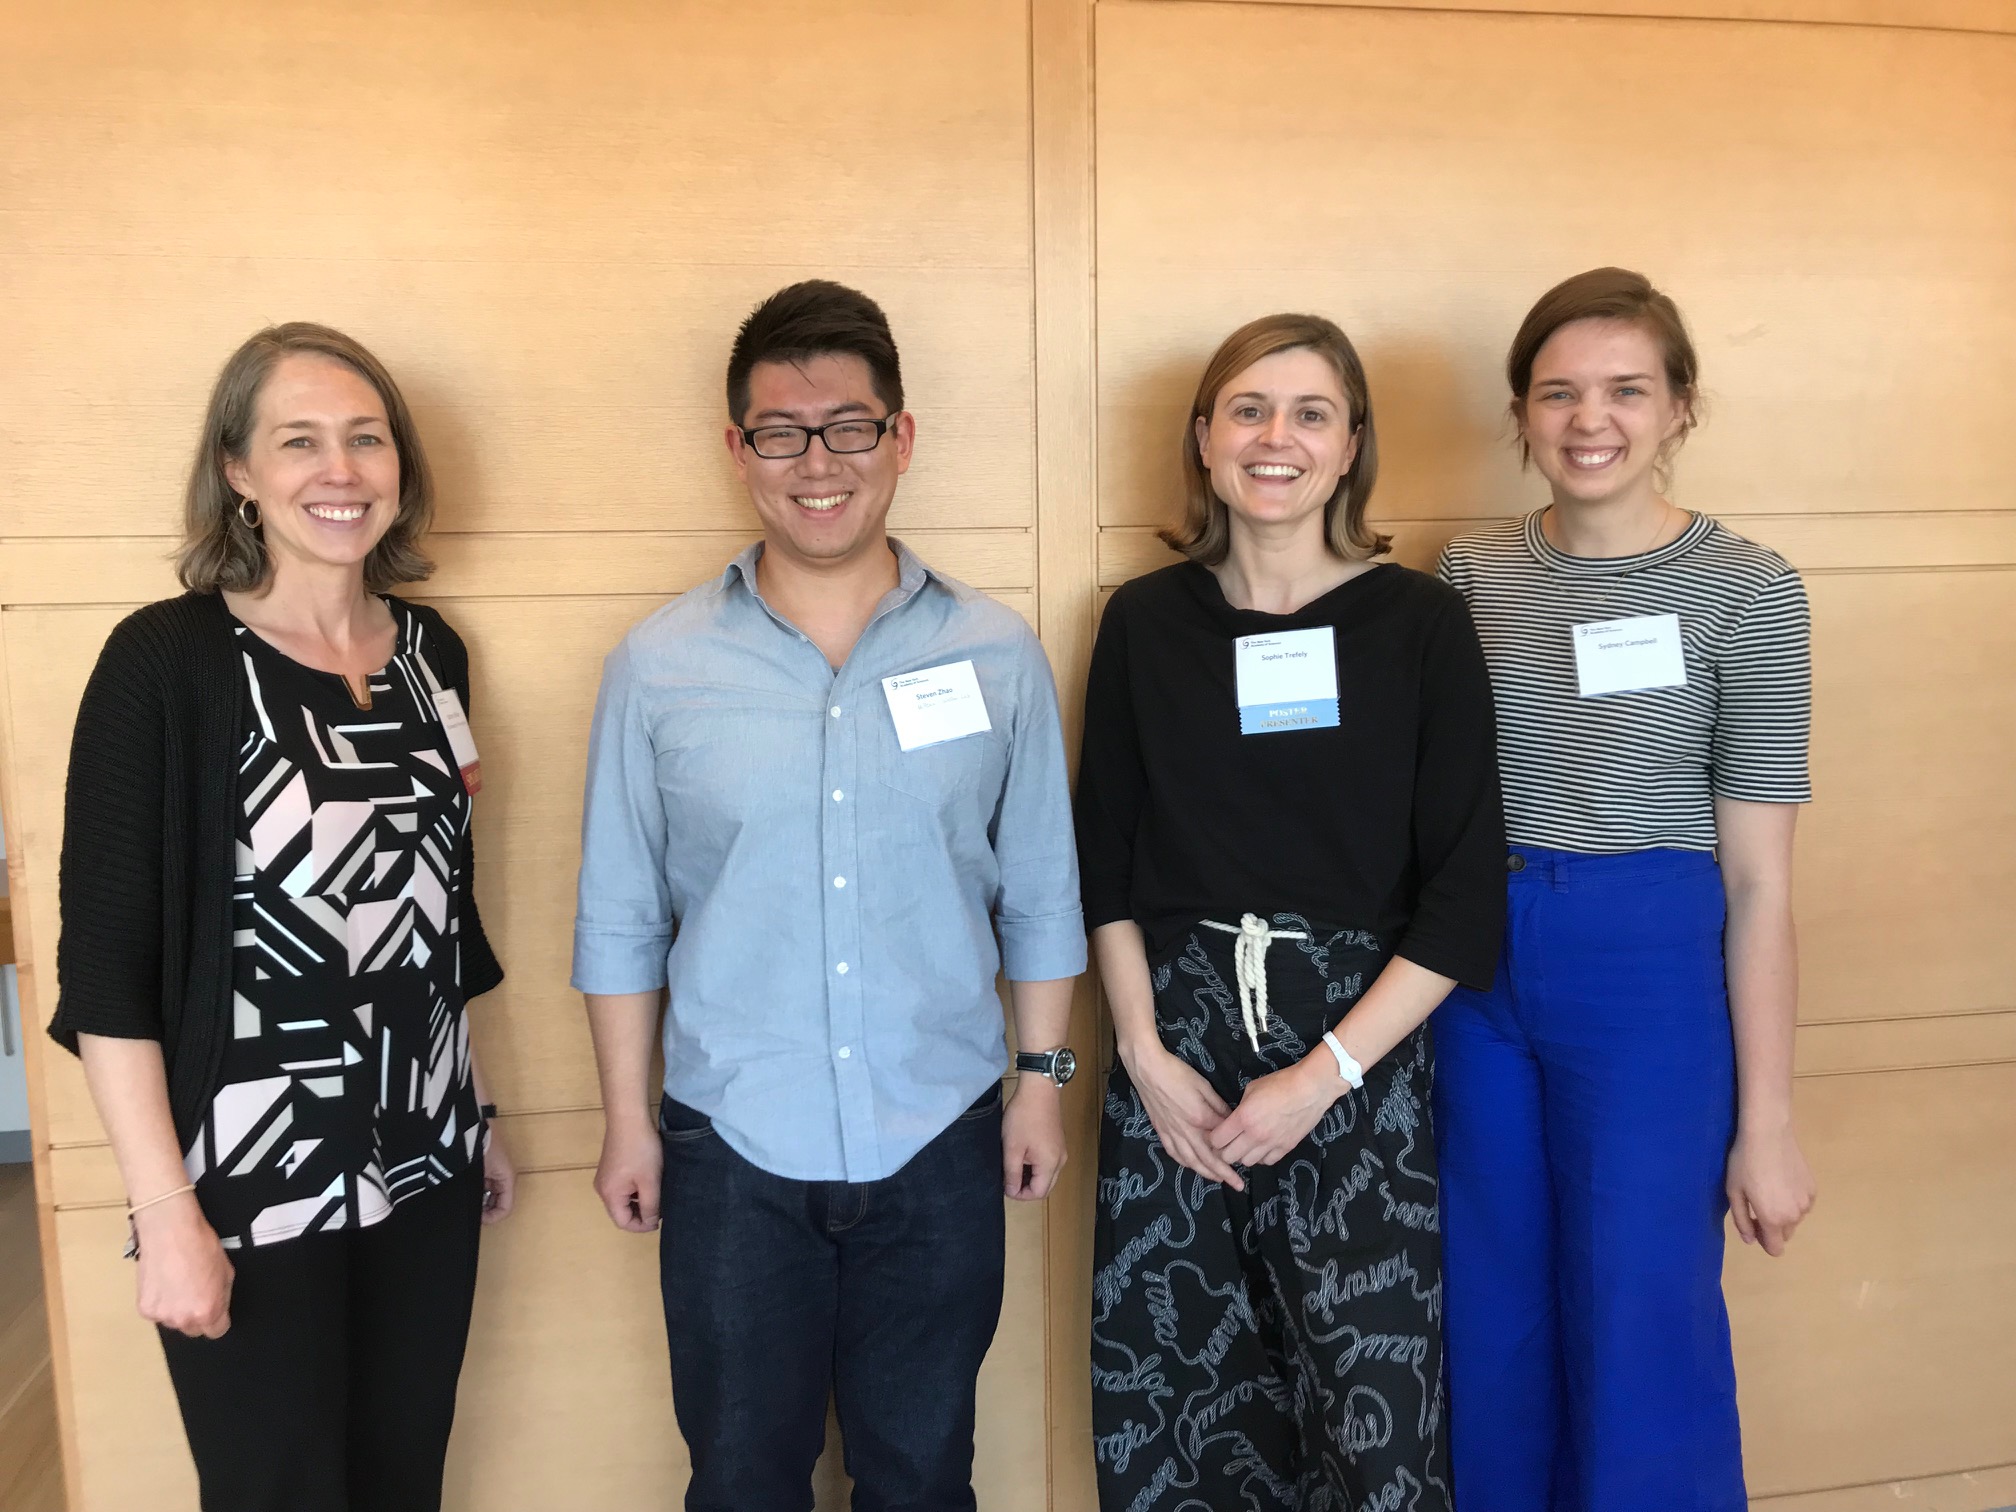  Katy, Steve, Sophie, and Sydney at the NYAS Cancer Metabolism and Signaling Symposium